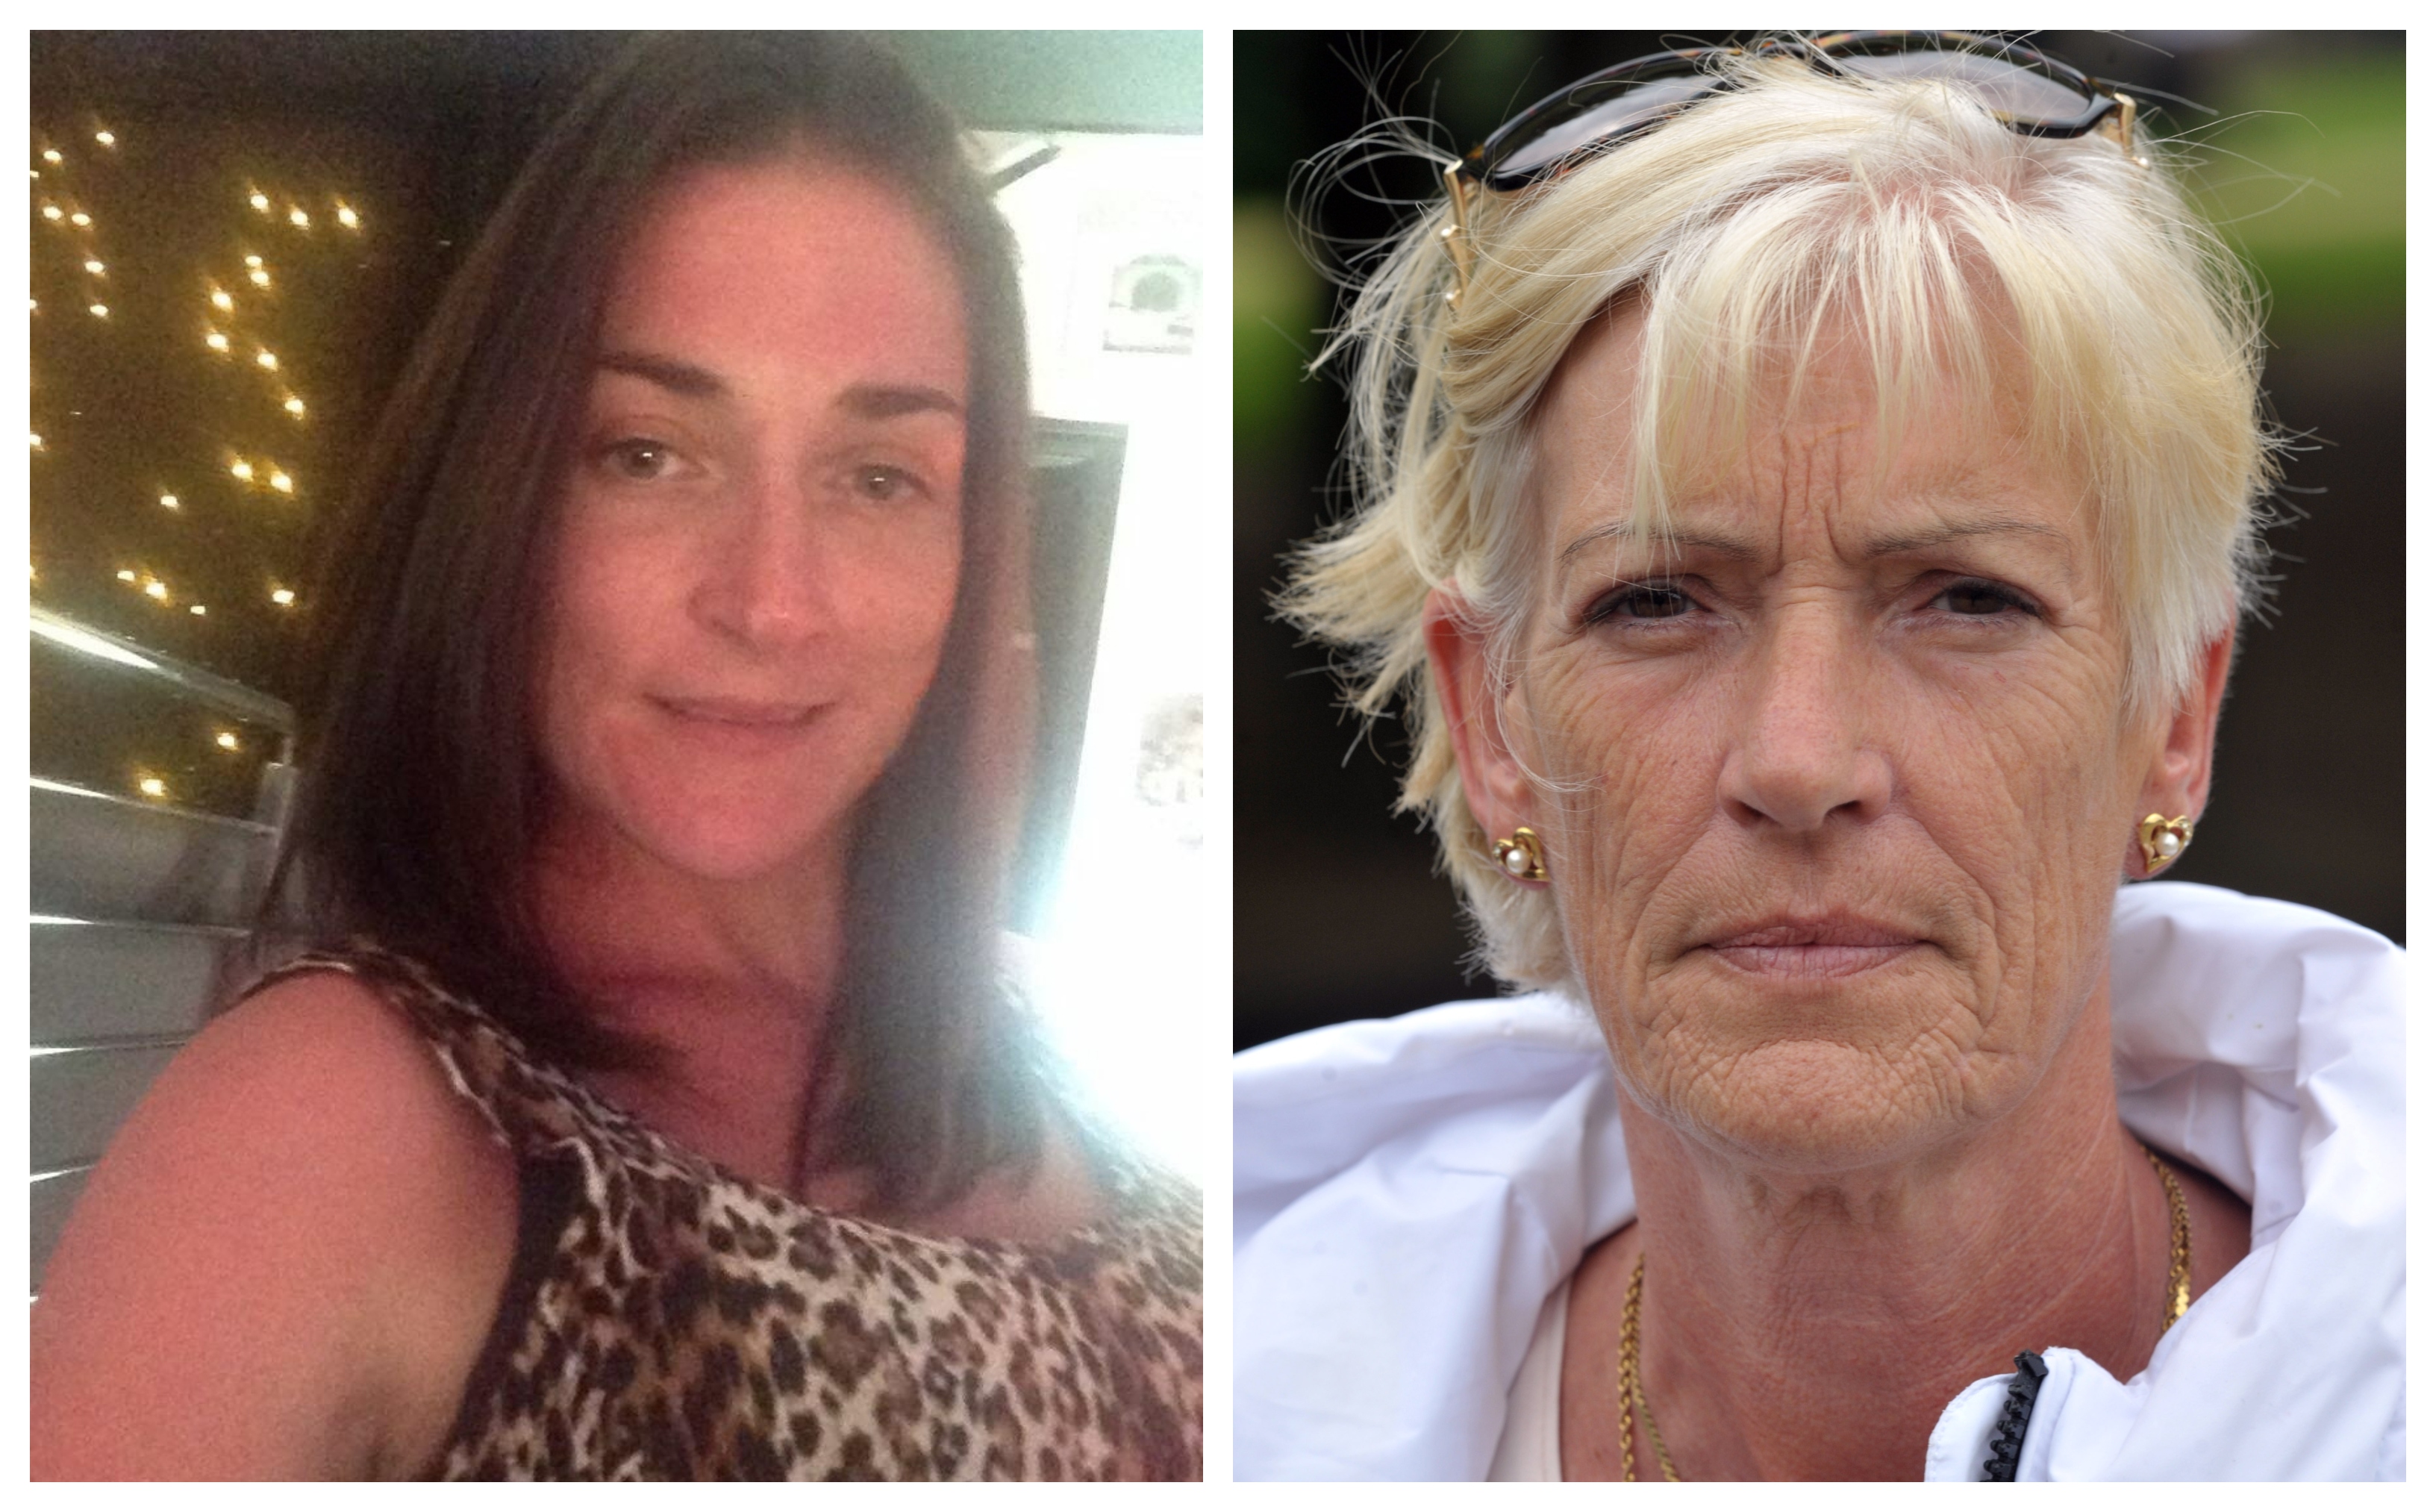 Mum of four Joanne Gallacher, left, was killed in December 2018. Her mum Louise has sent an official complaint to the NHS over what happened